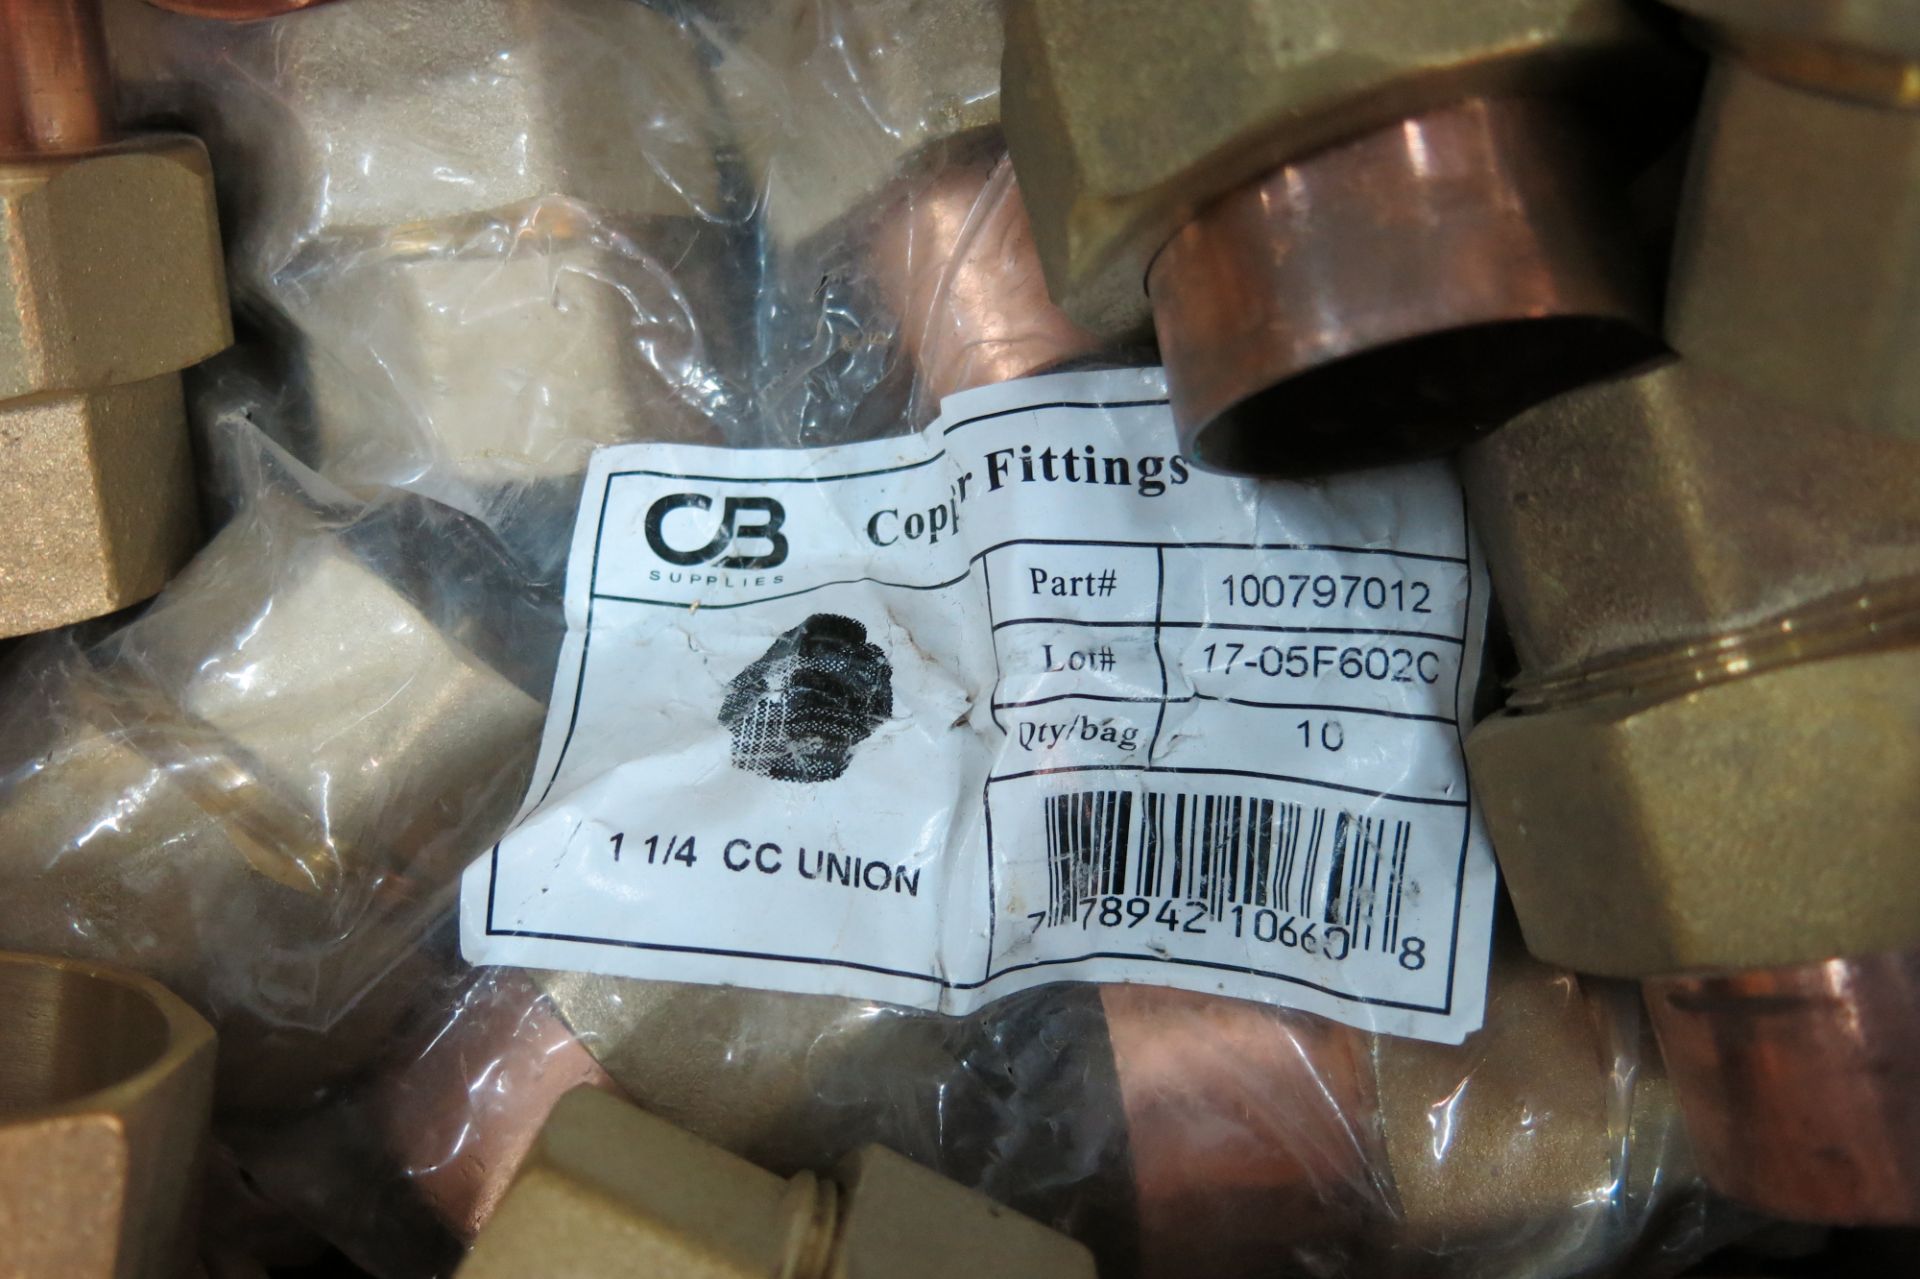 LOT OF CB SUPPLIES, 100797012, 1 1/4", COPPER UNION 102 - NEW (LOCATED IN SCARBOROUGH) - Image 2 of 2